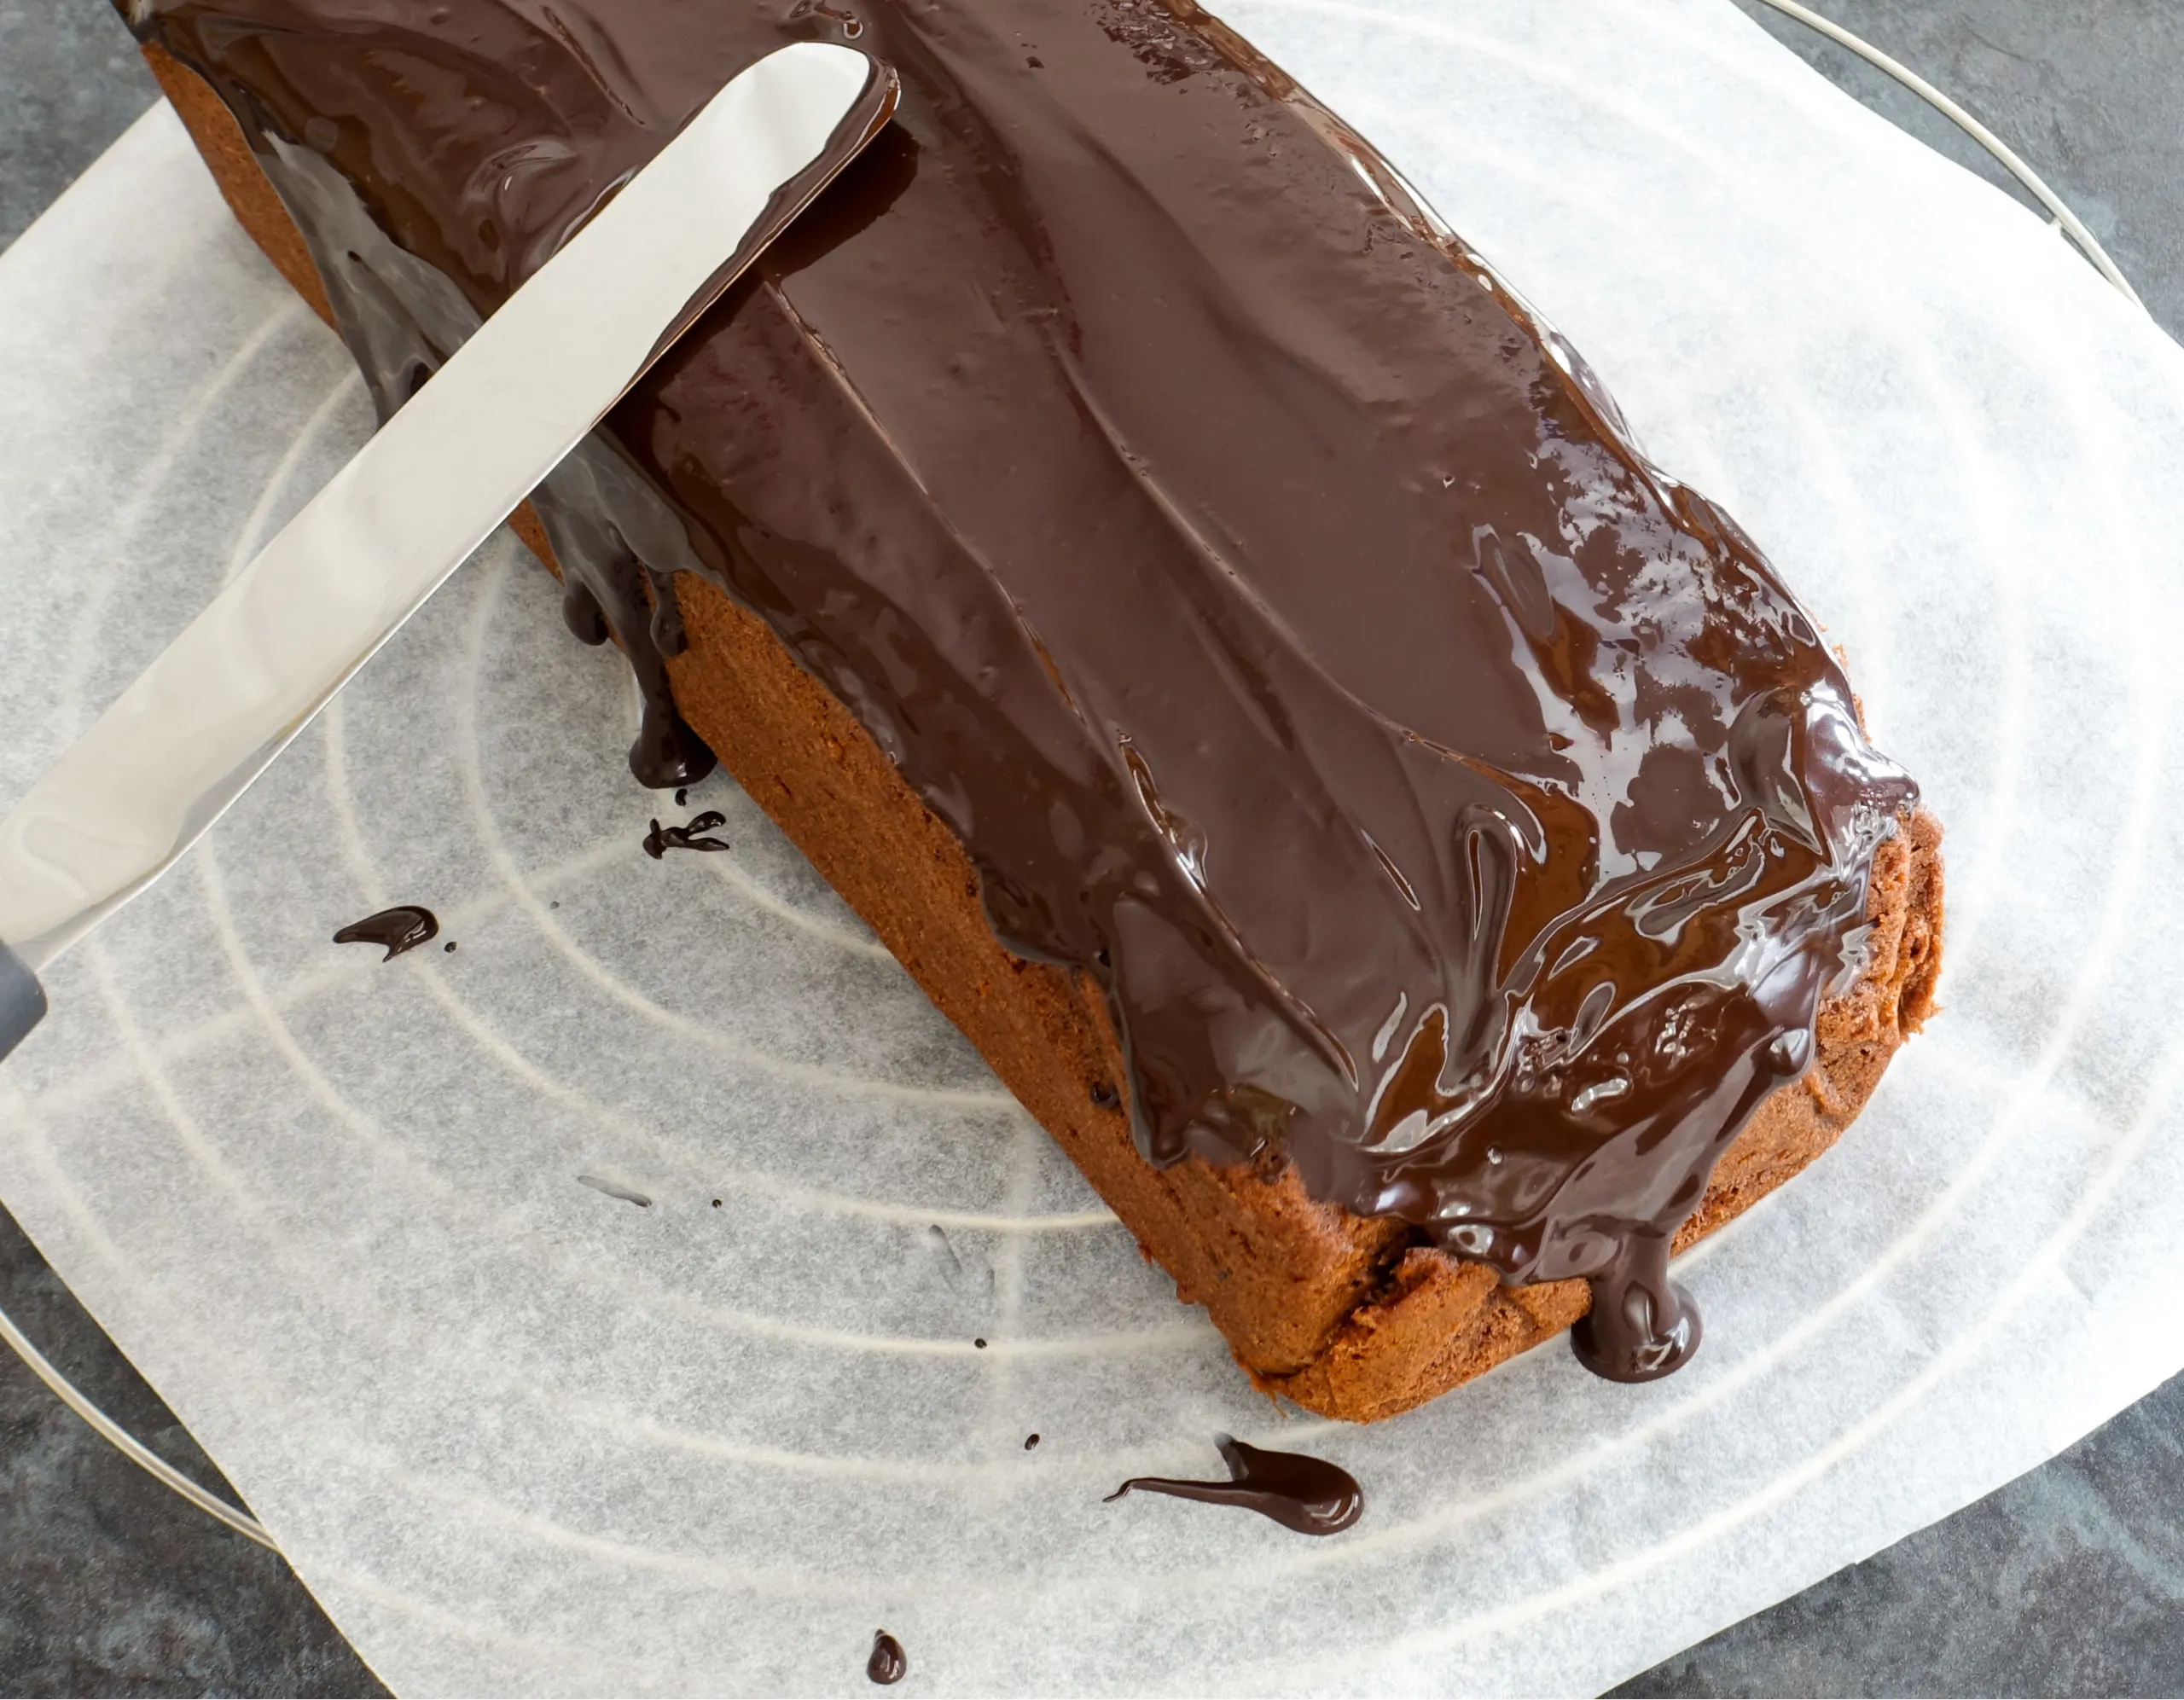 keto sour cream chocolate pound cake with chocolate ganache being smoothed over the top